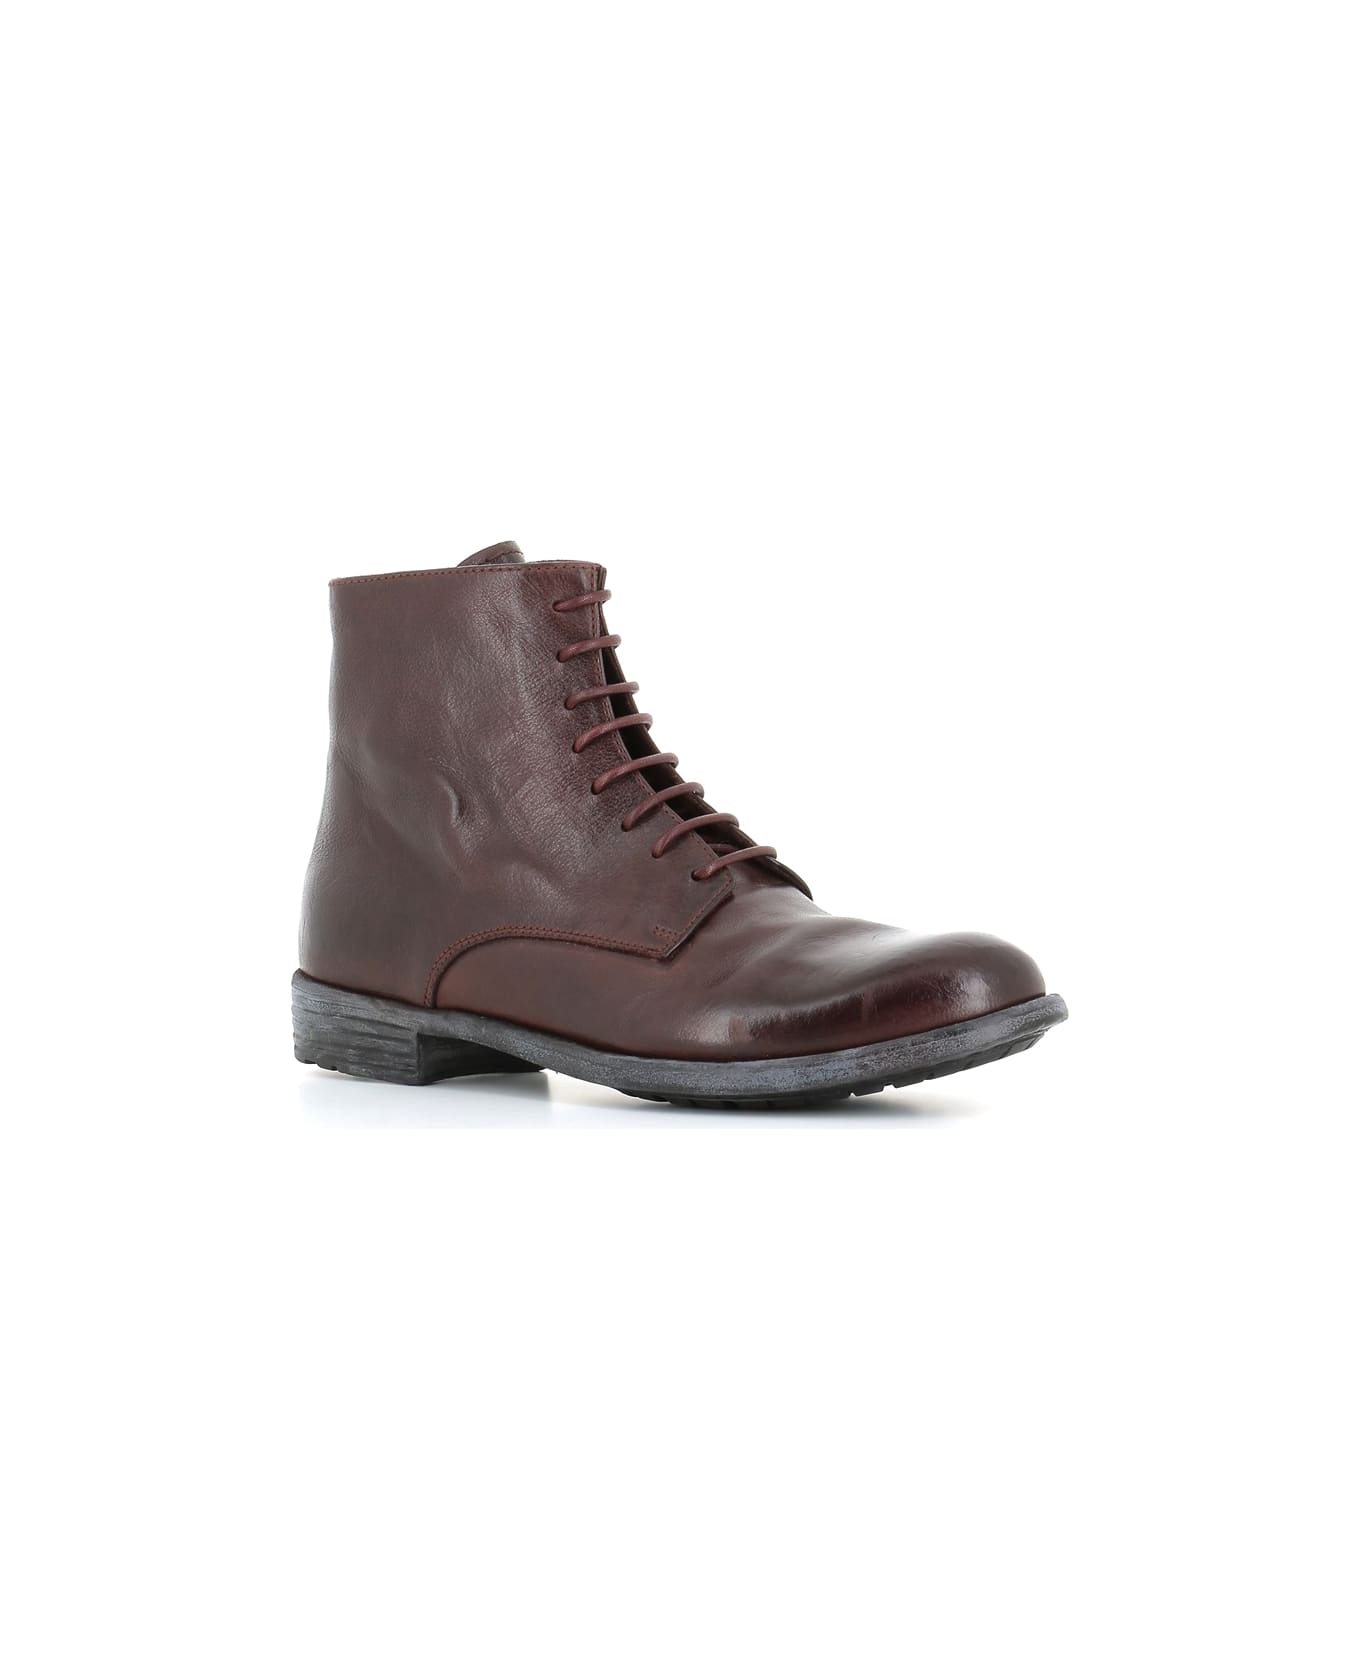 Officine Creative Lace-up Boots Mars/007 - Brown ブーツ